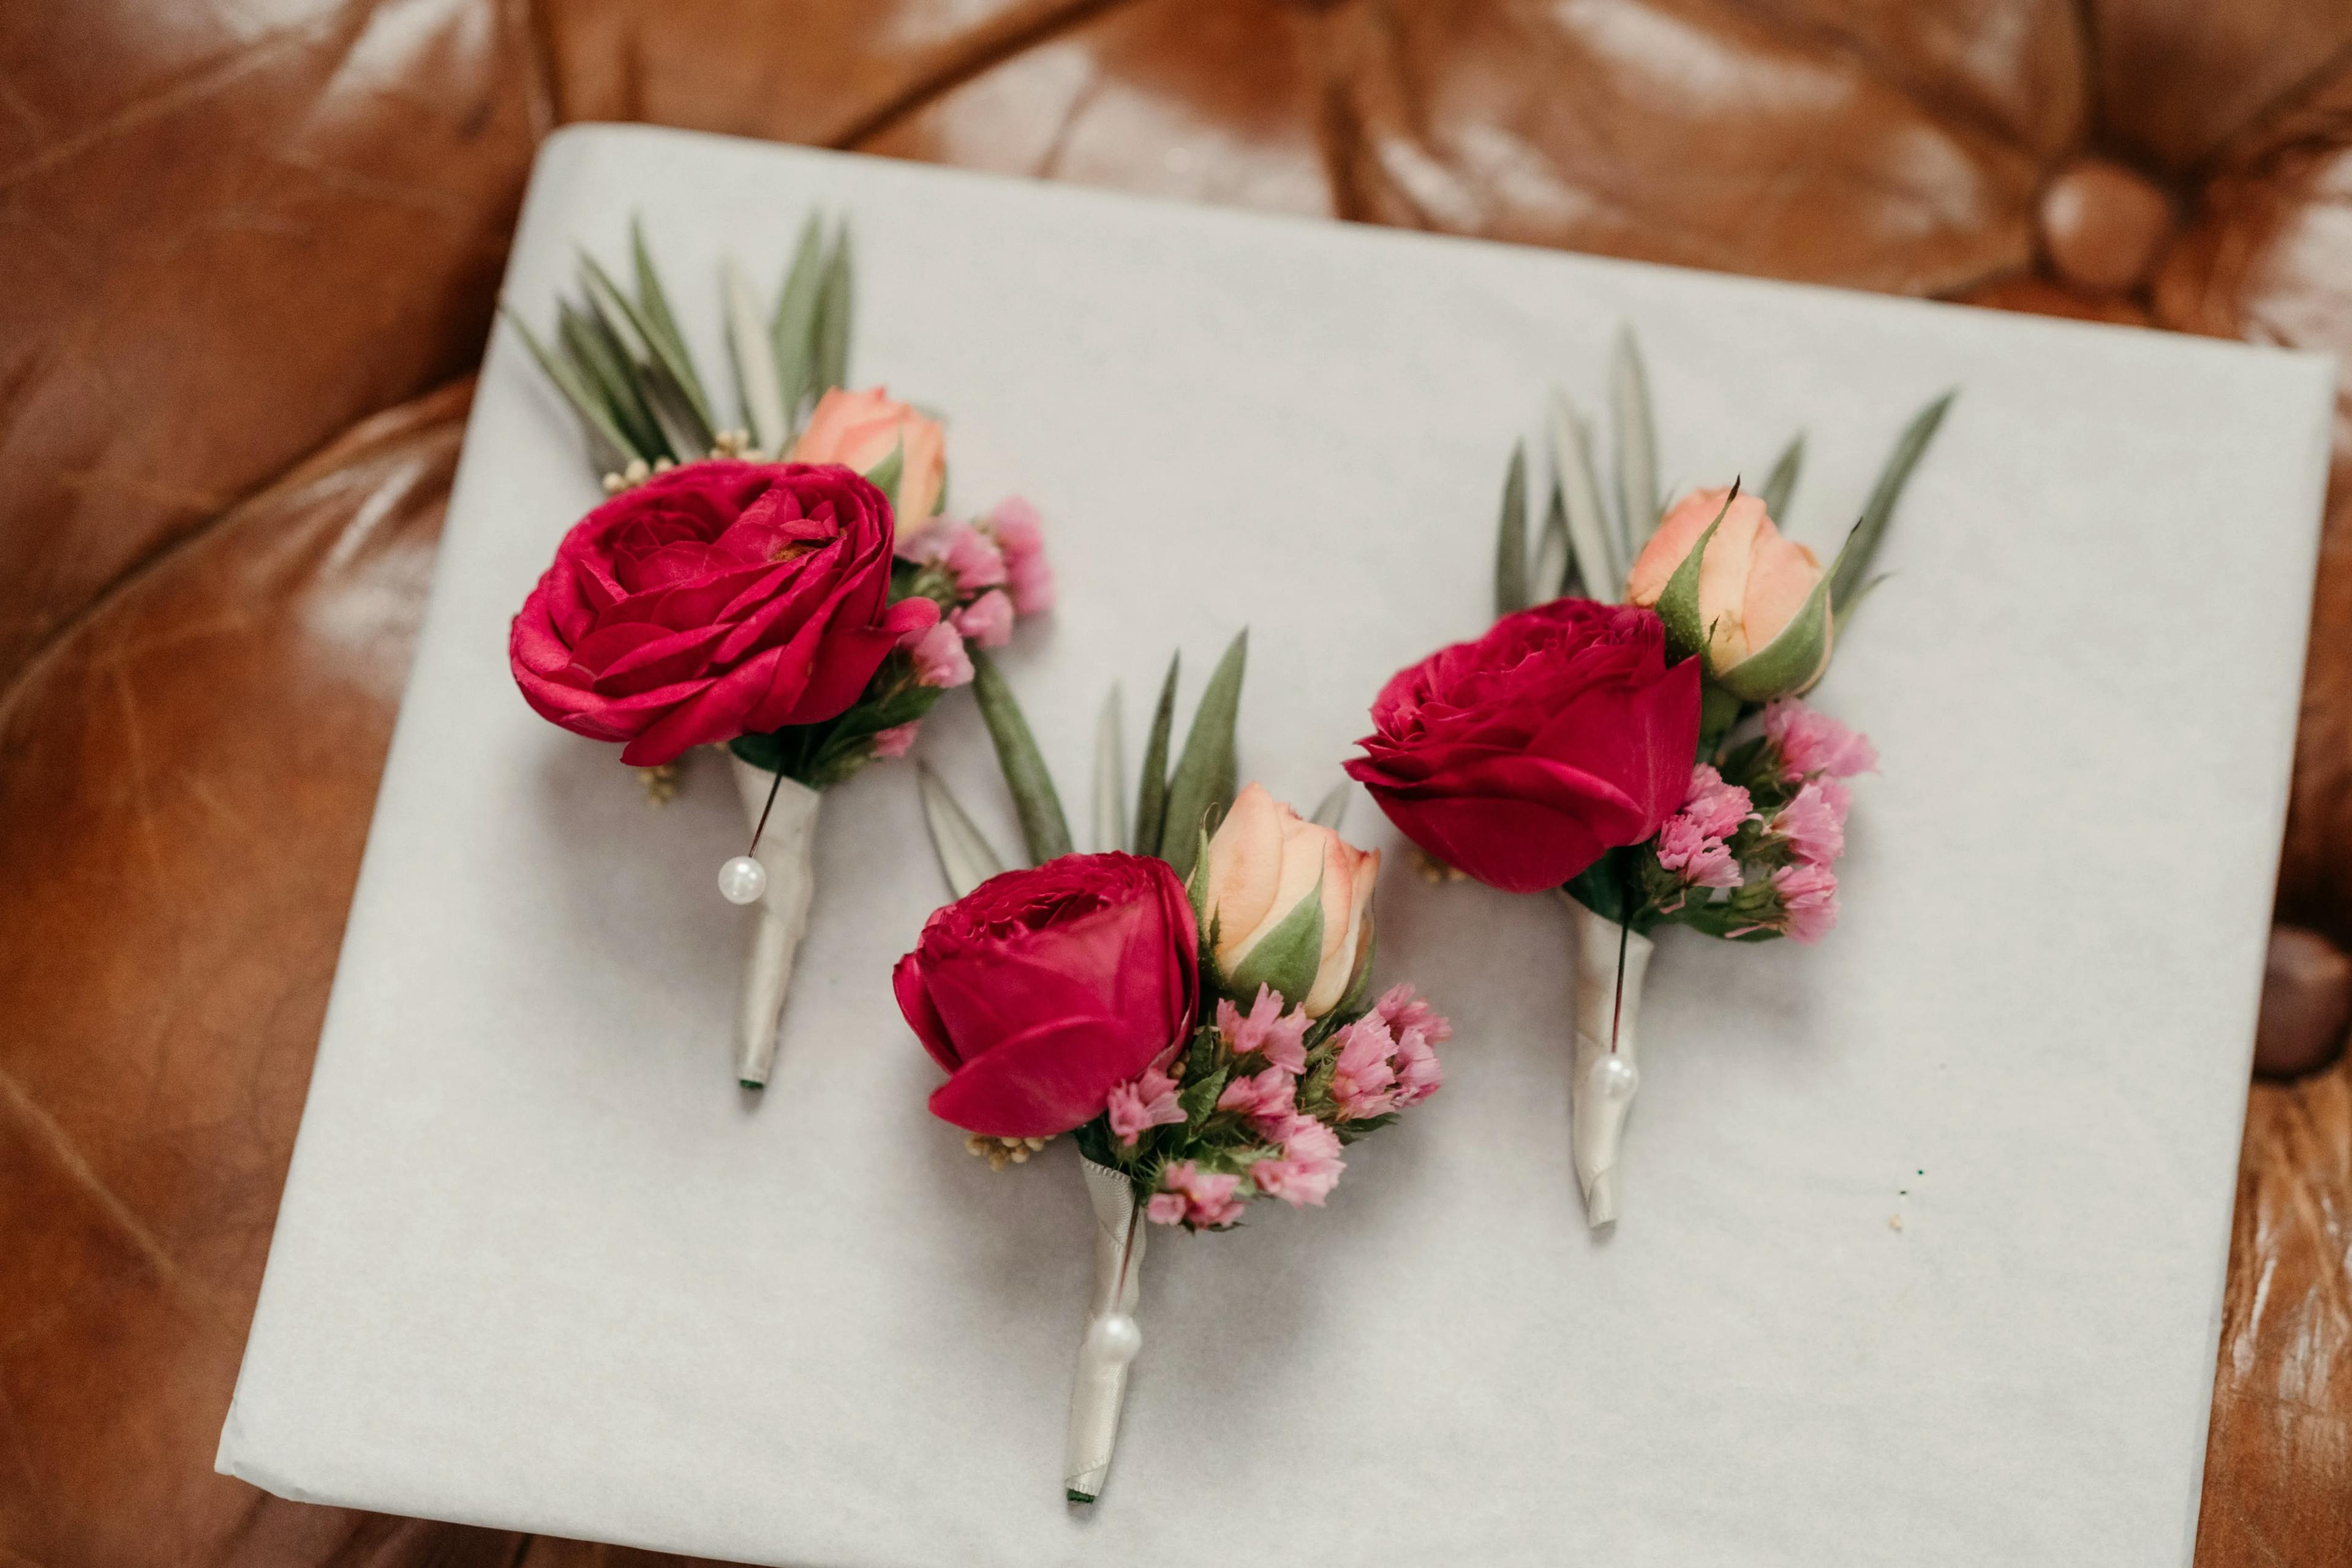 Three boutonnières arranged on a white surface, each featuring one red rose, one peach rosebud, small pink flowers, and green leaves, secured with white pins. The background is a brown leather texture.